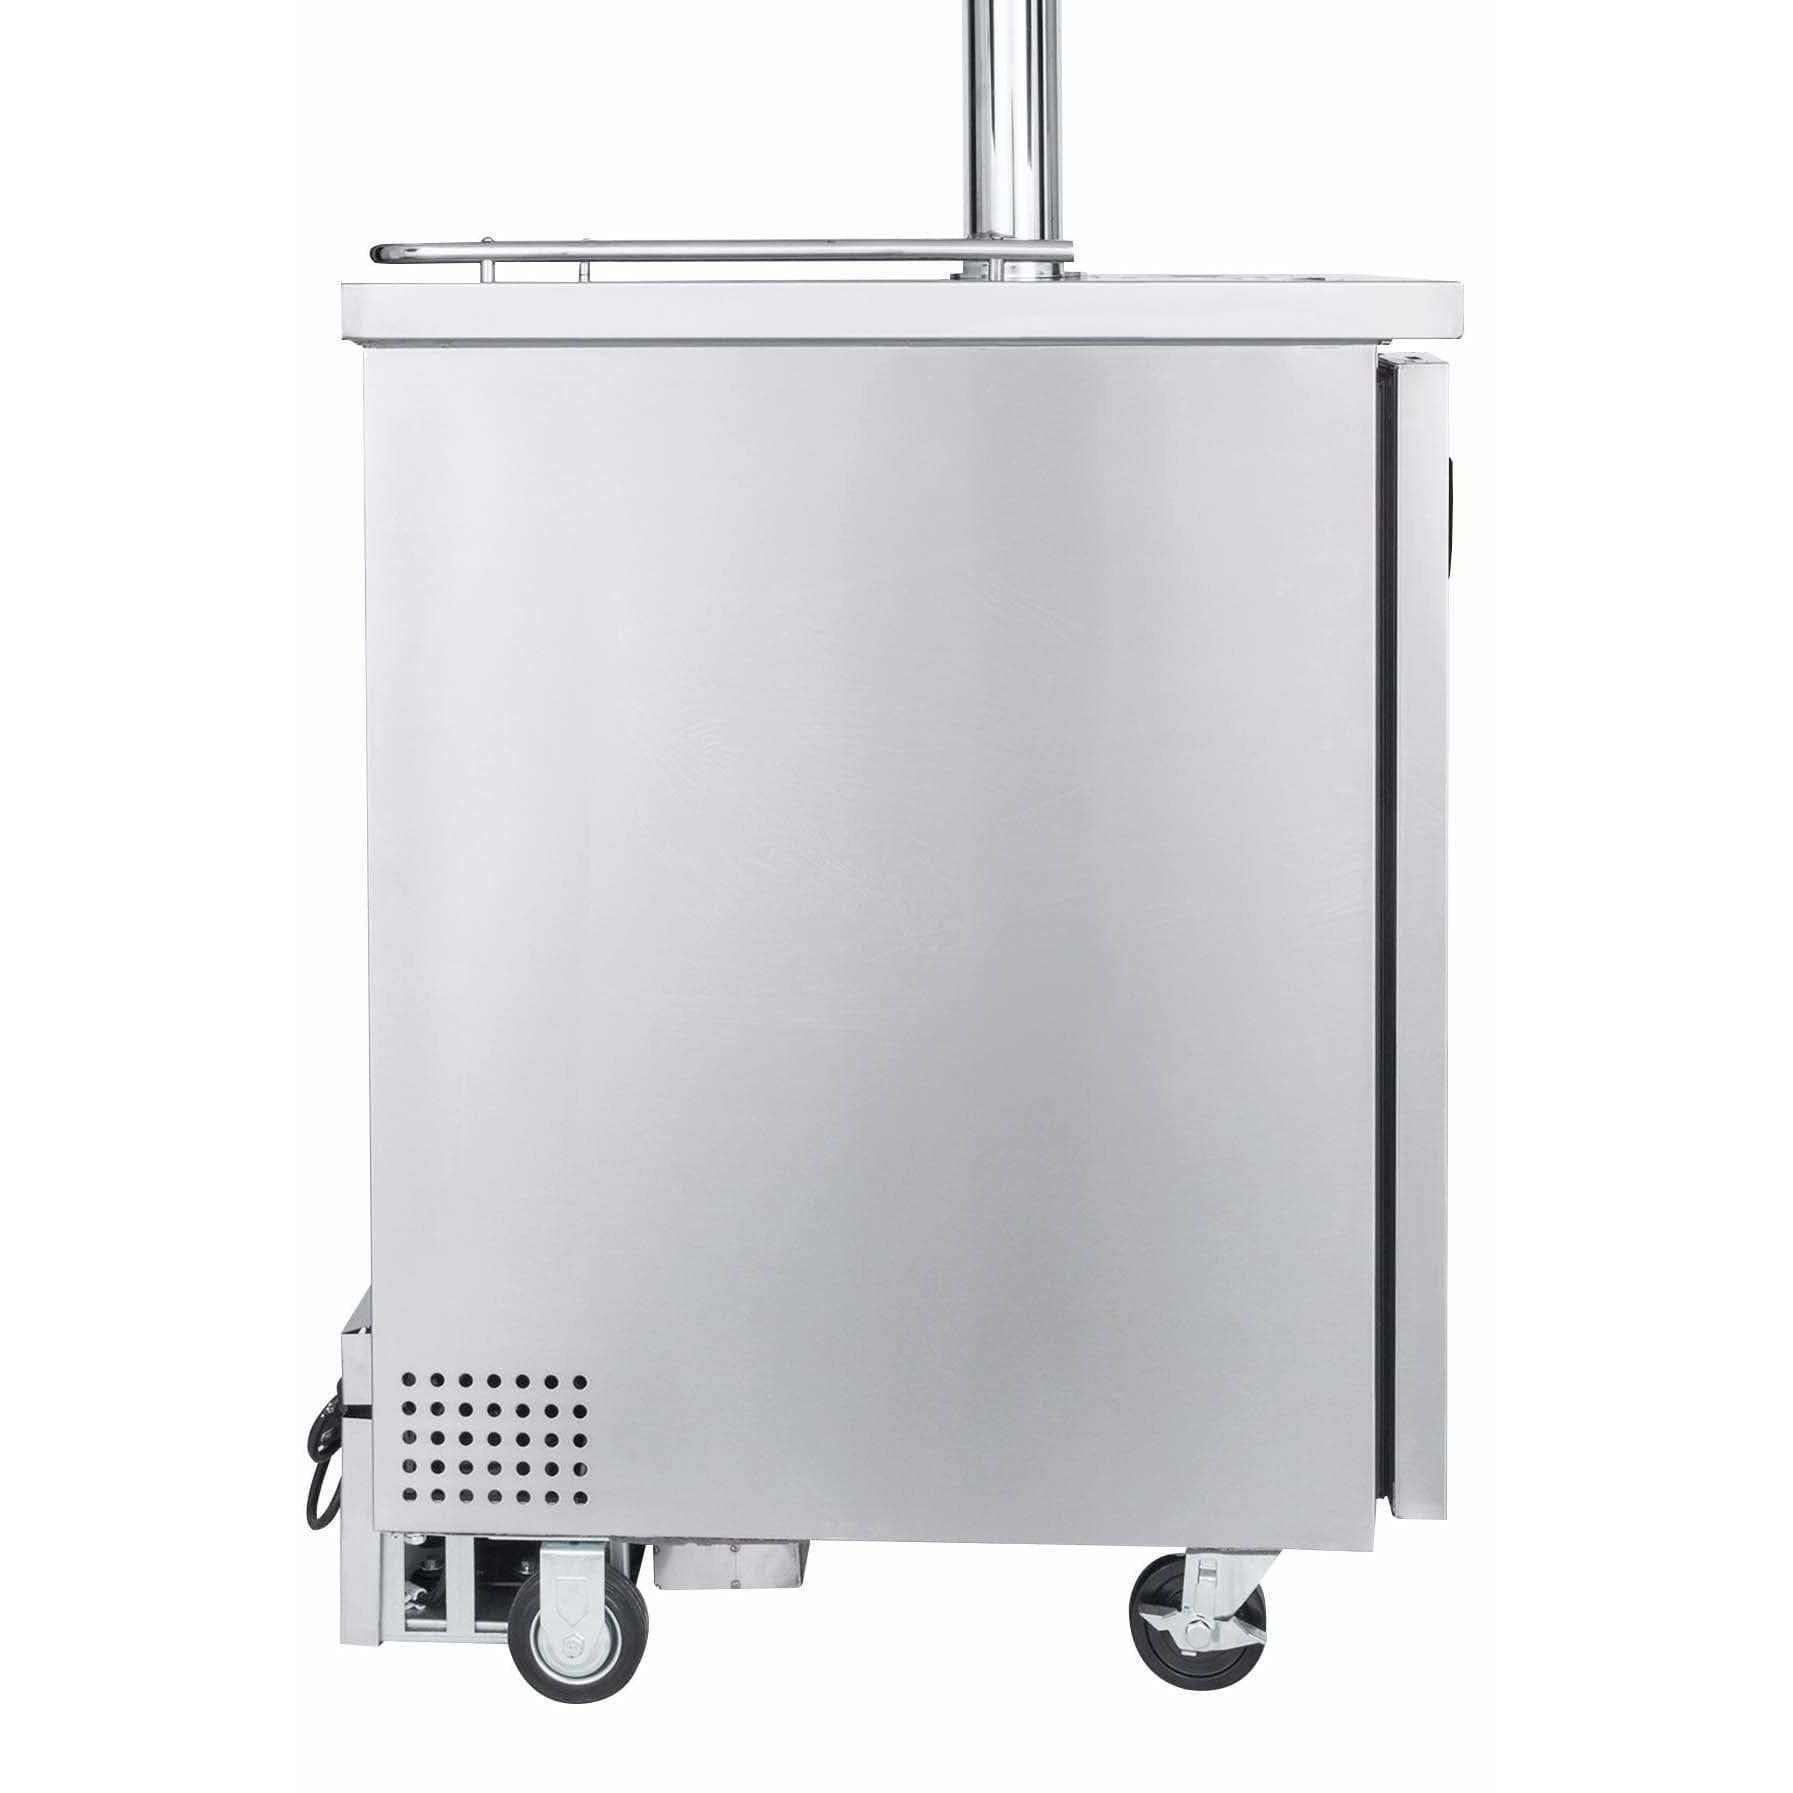 Kegco 24" Wide Single Tap Stainless Steel  Home Brew Kegerator HBK1XS-1 Wine Coolers Empire